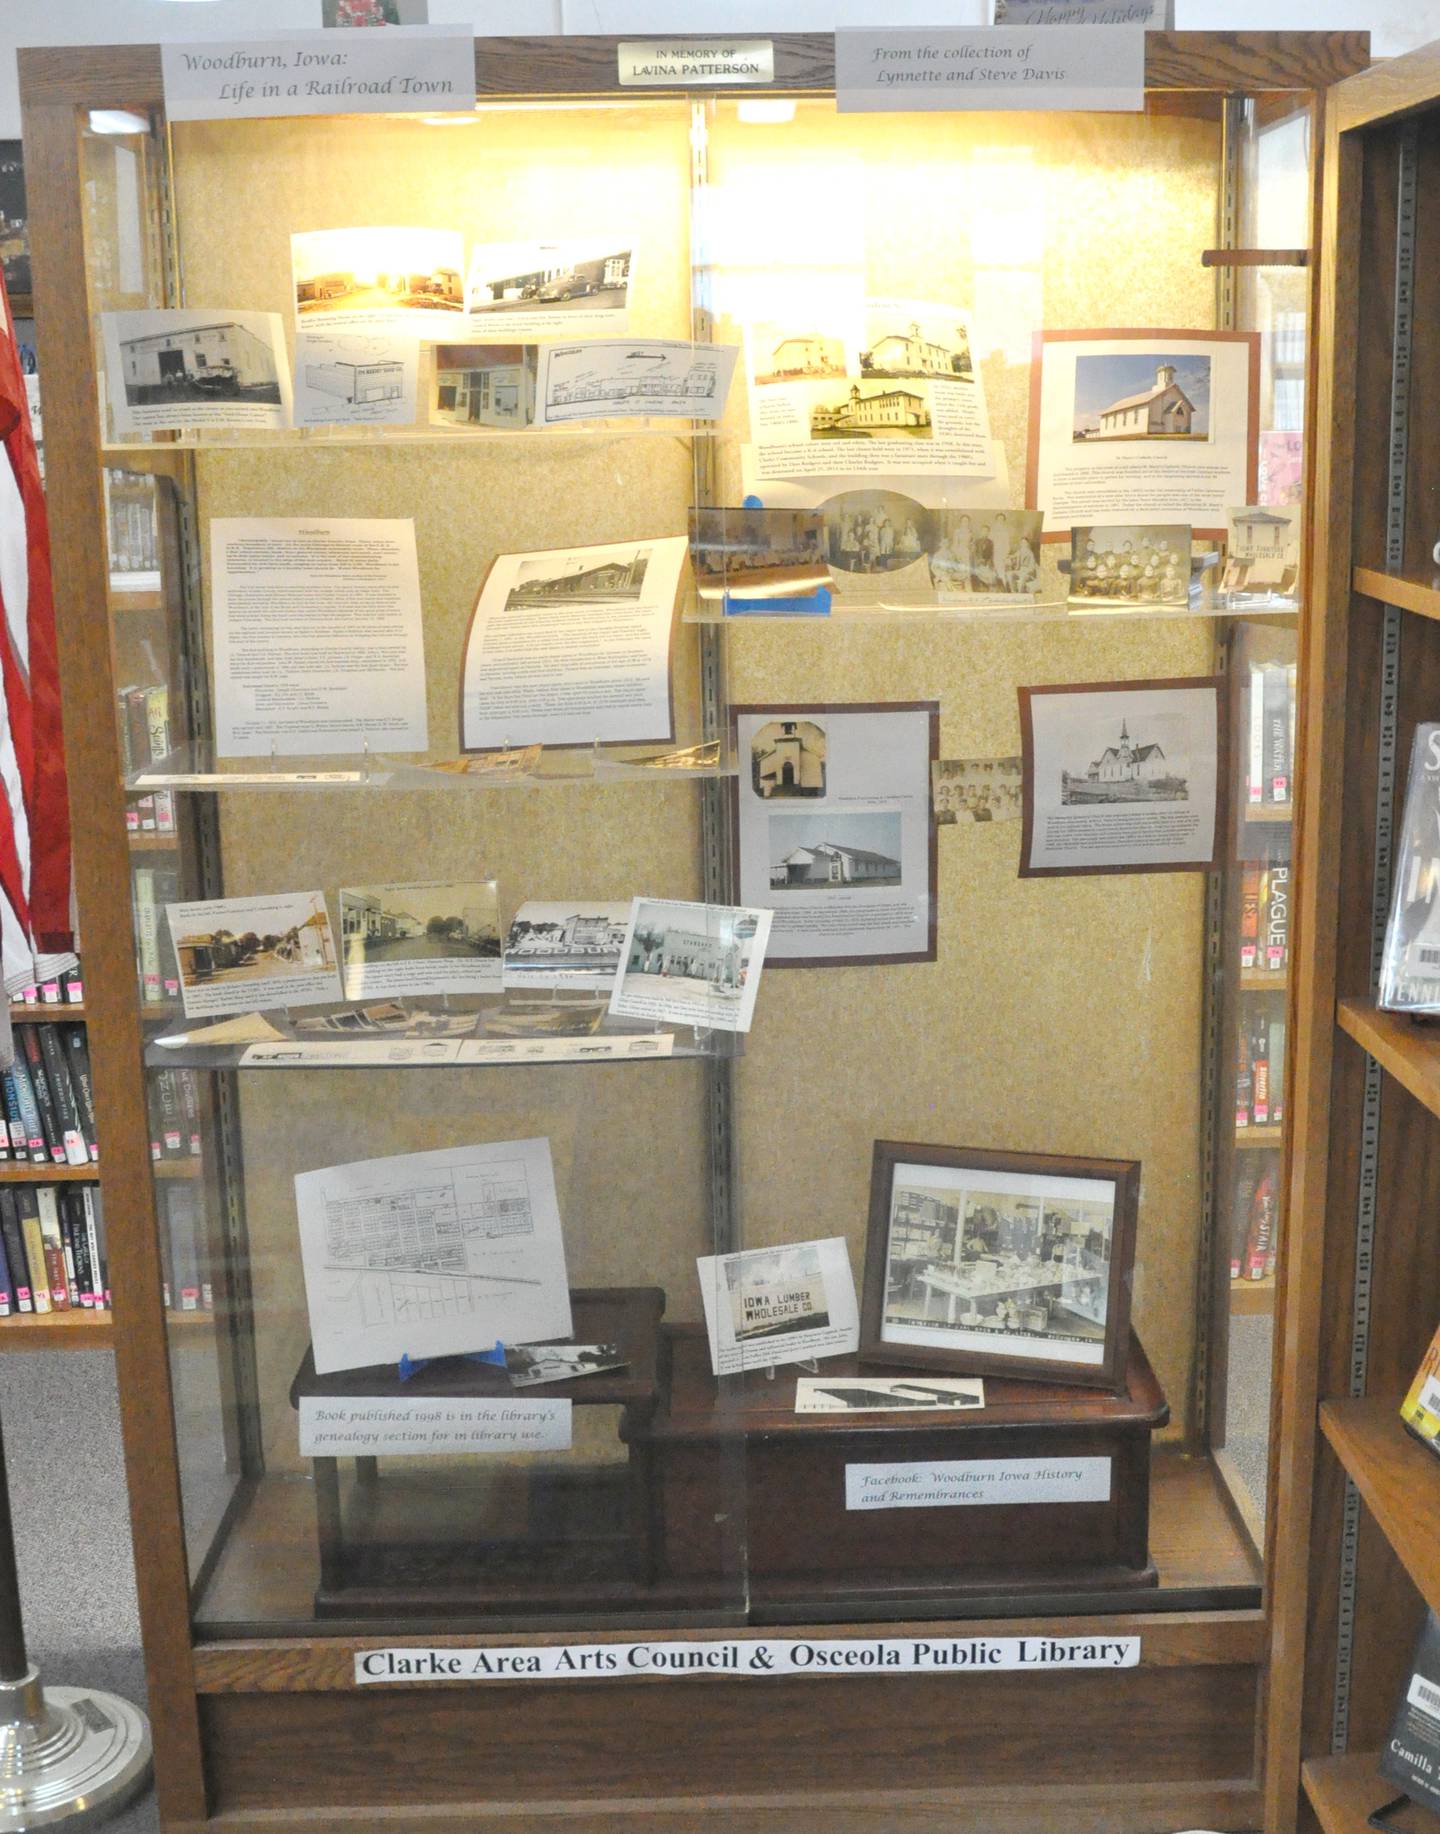 One of the Woodburn history displays at the Osceola Public Library.